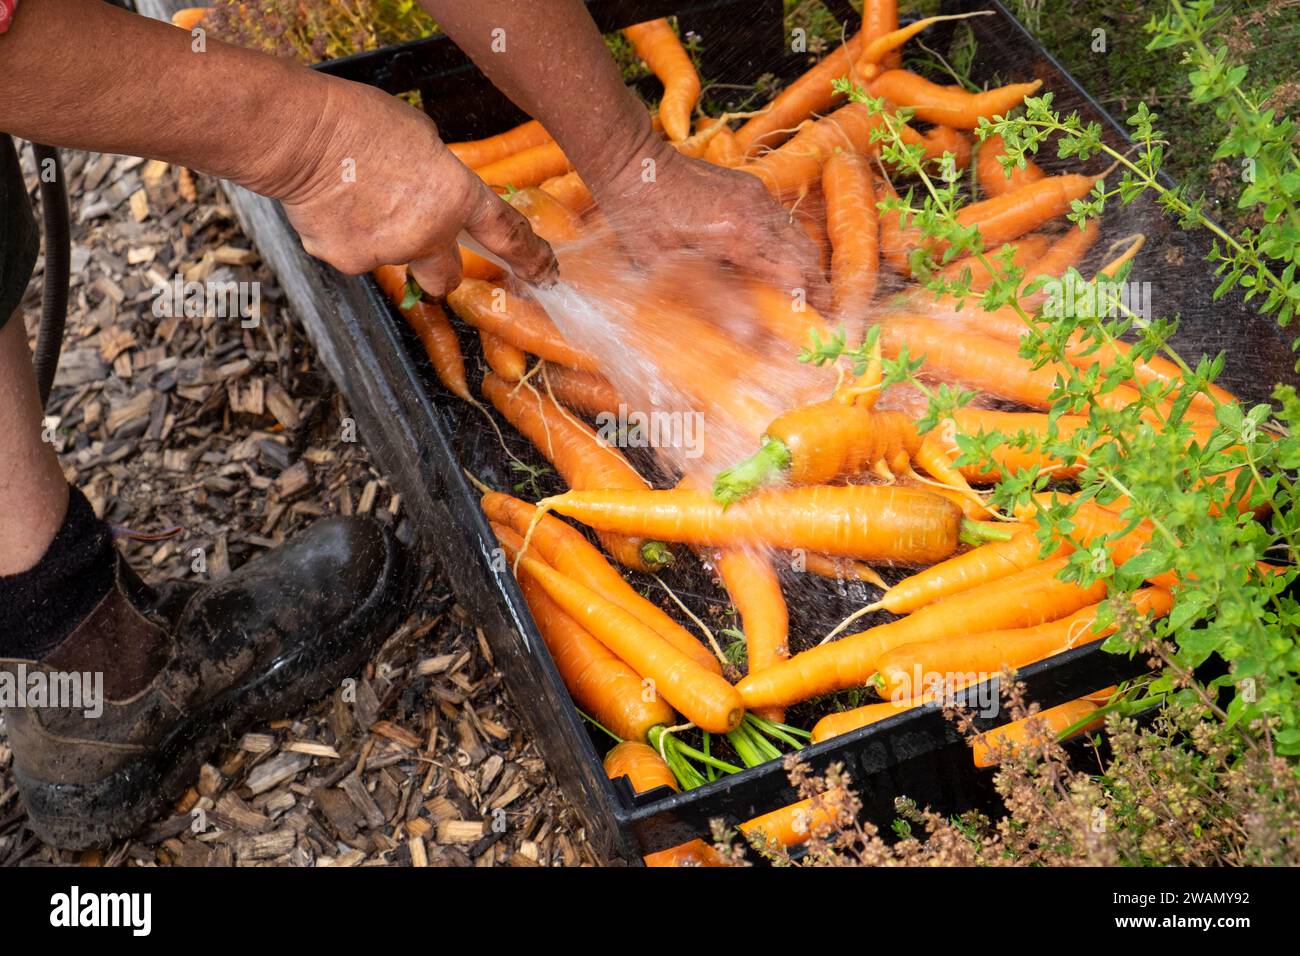 Washing fresh picked carrots using a hose and a plastic bakers tray. Stock Photo